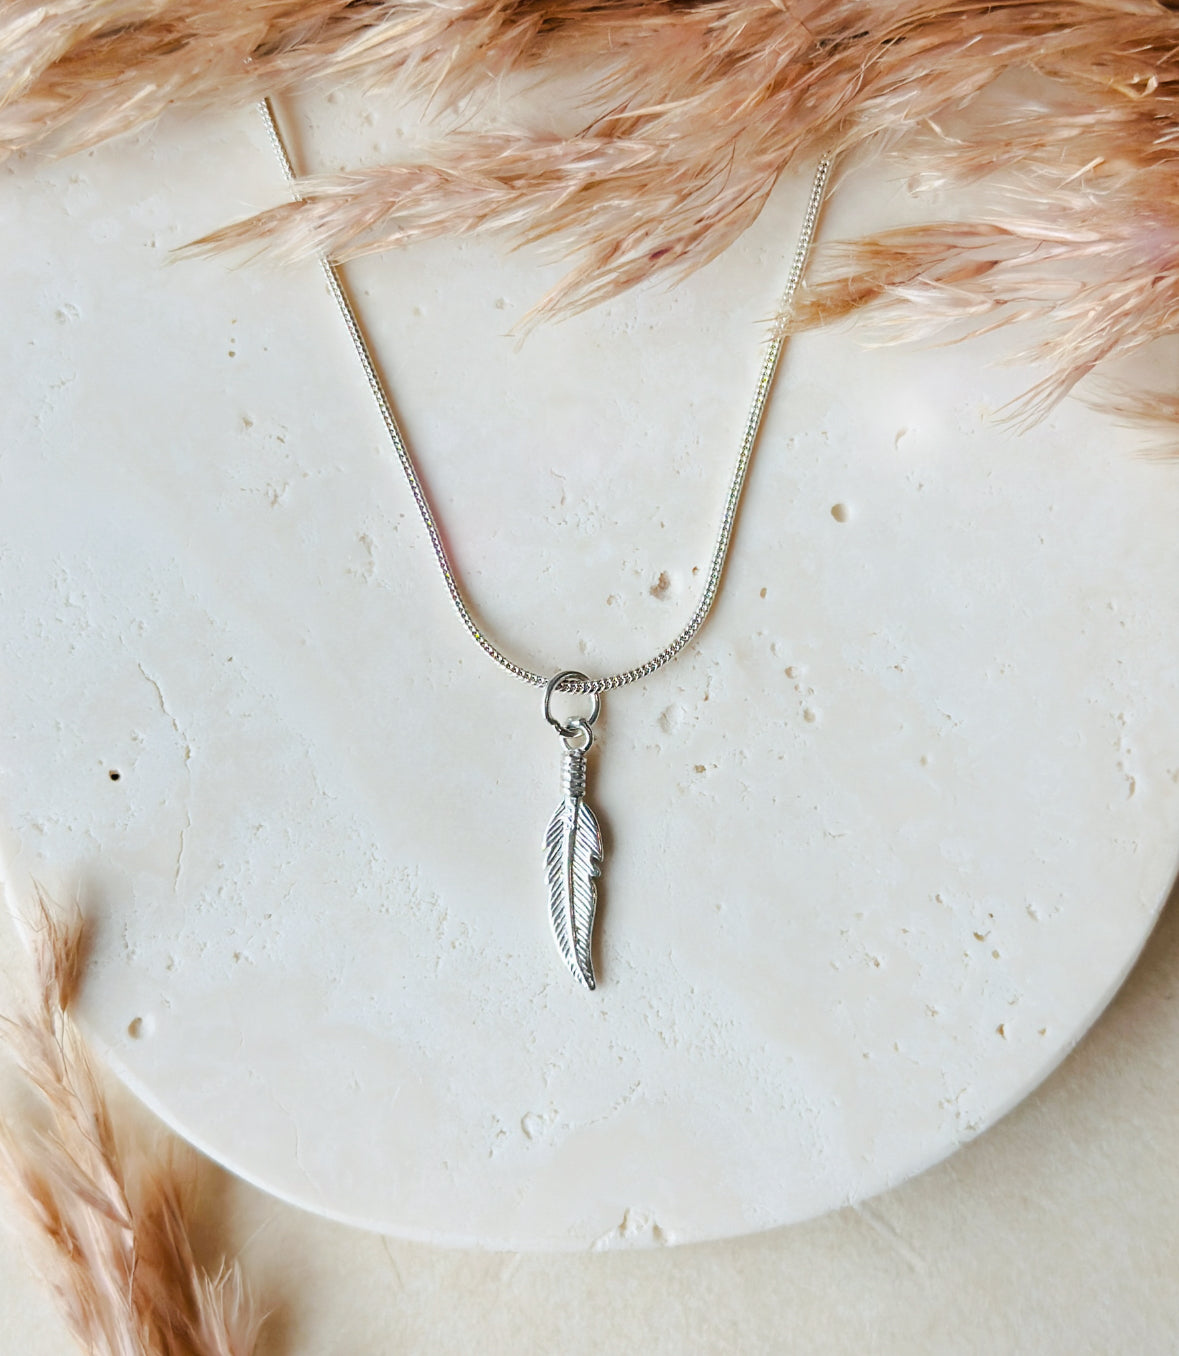 The Free Spirit Necklace